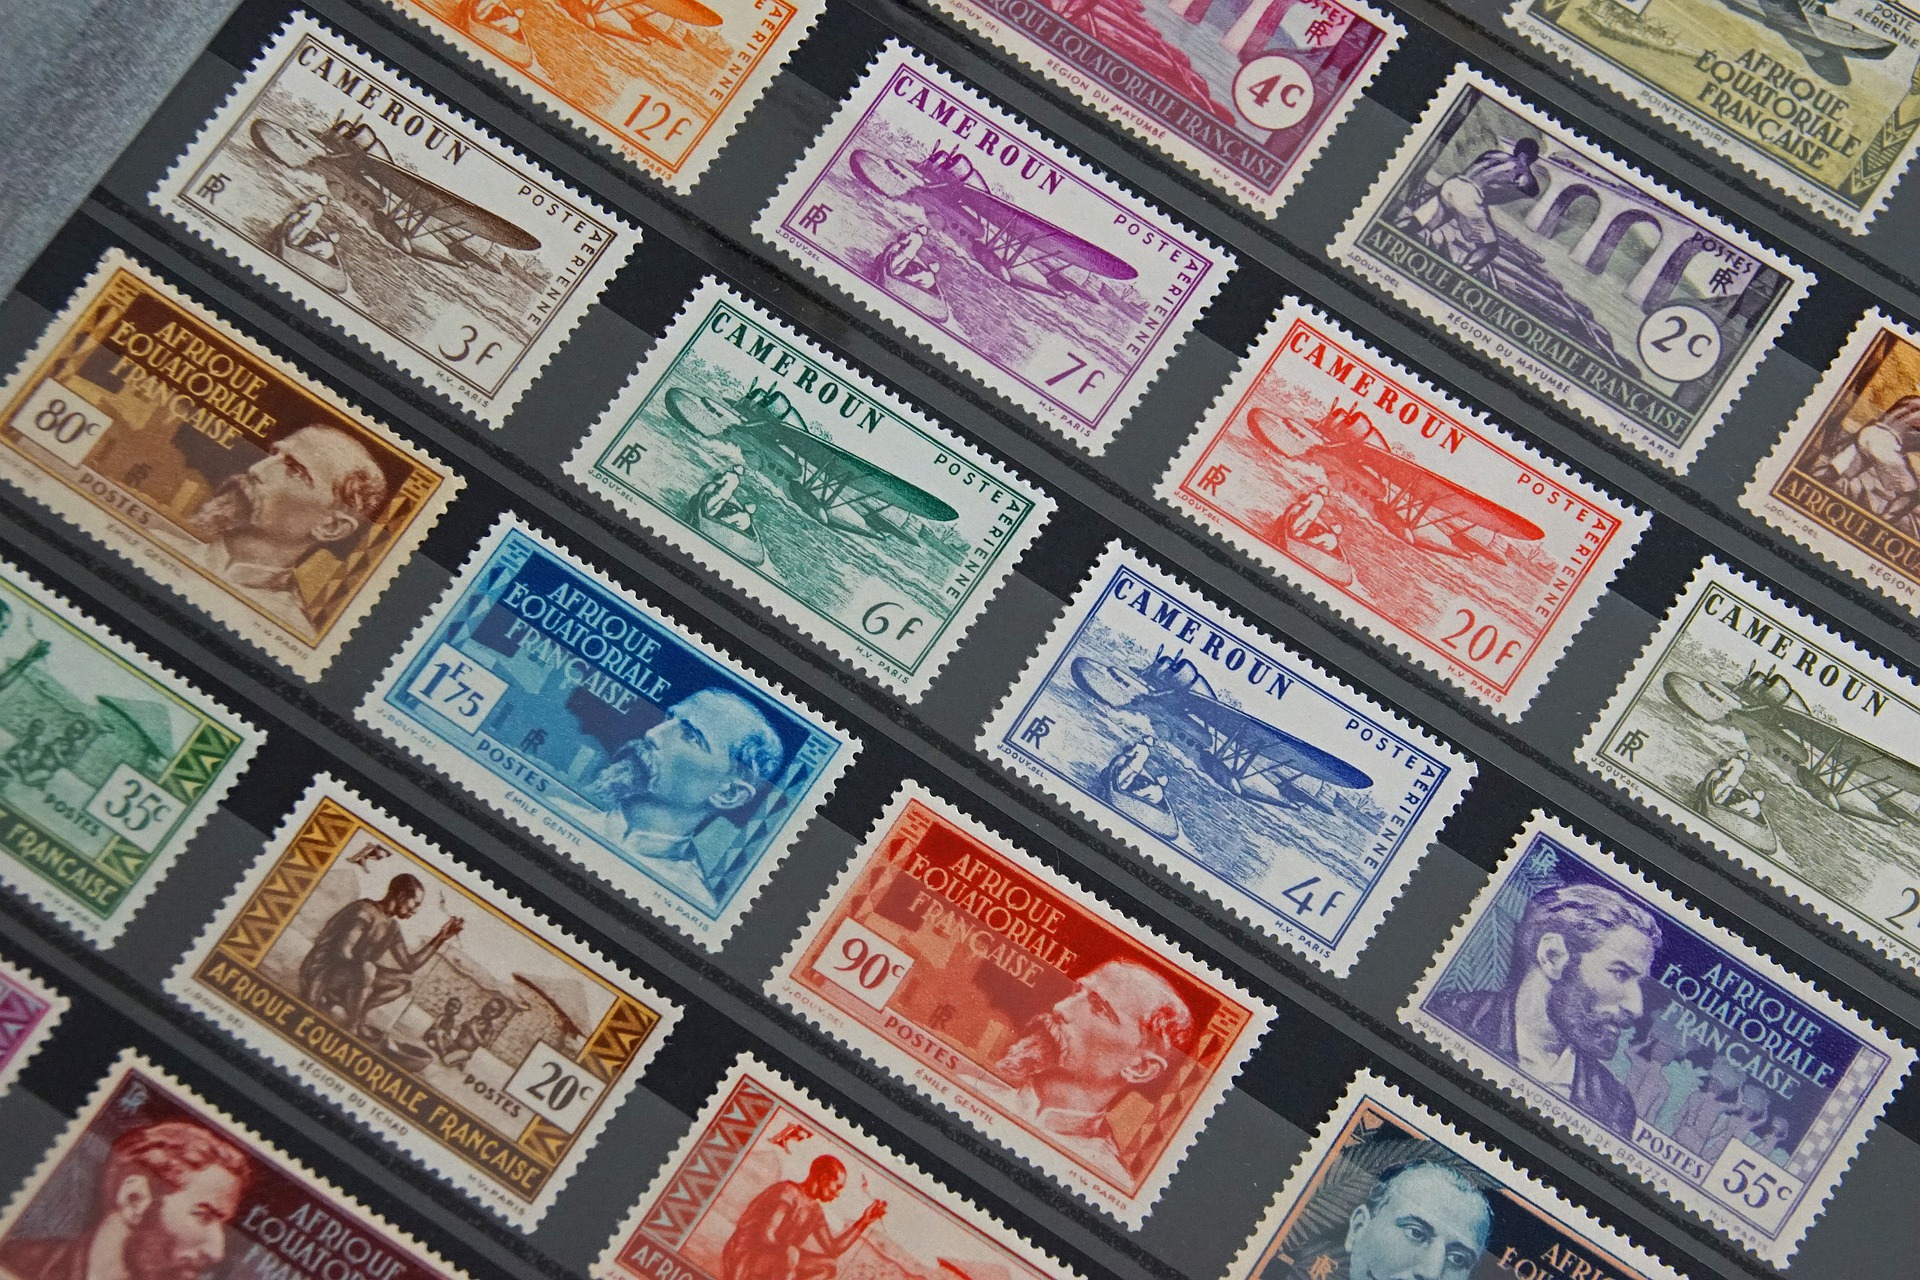 Stamp Collecting Collector Philatelist  Postcard for Sale by TastefulTees